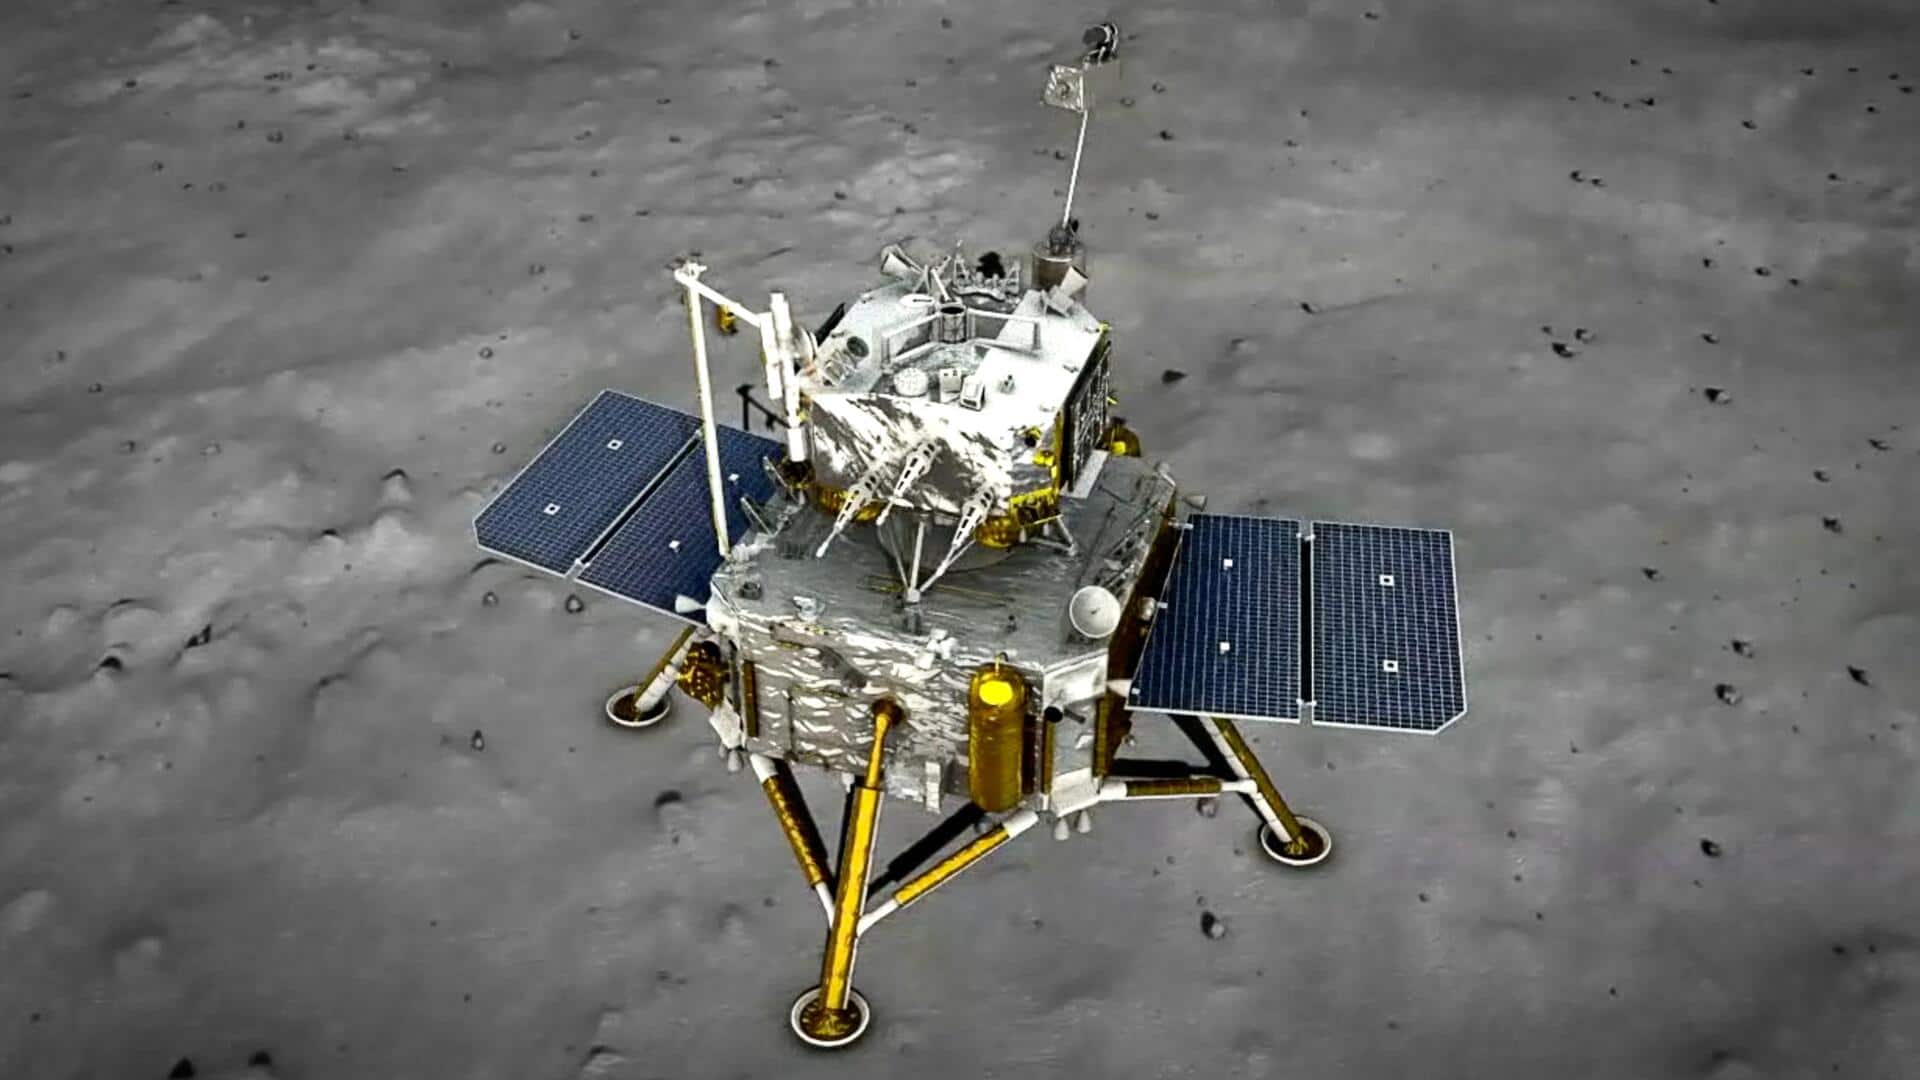 China's Chang'e 6 lunar probe is carrying mysterious mini rover